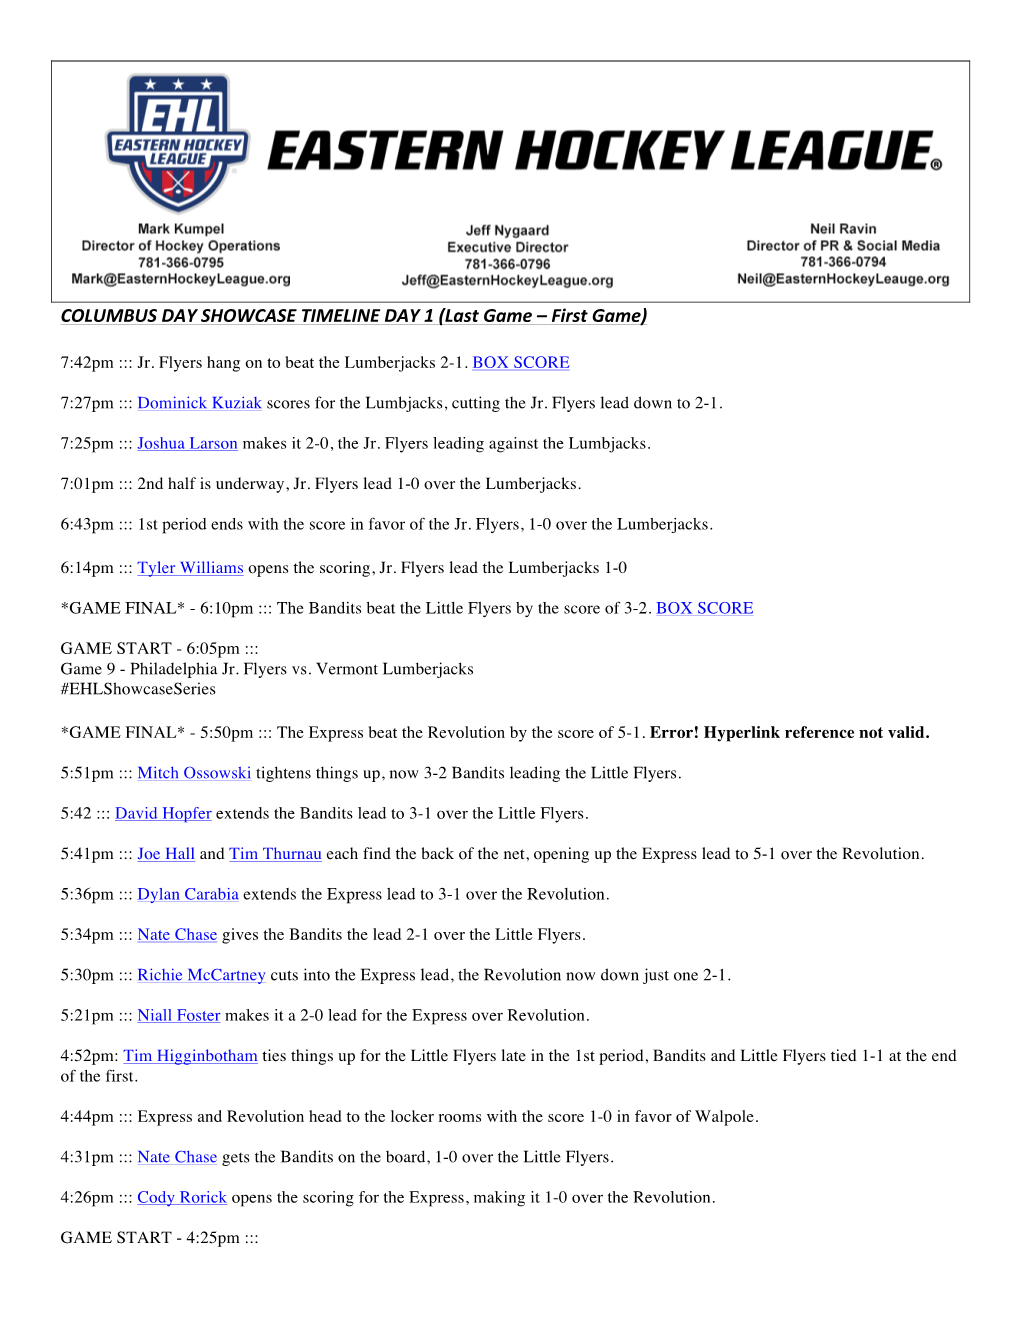 COLUMBUS DAY SHOWCASE TIMELINE DAY 1 (Last Game – First Game)